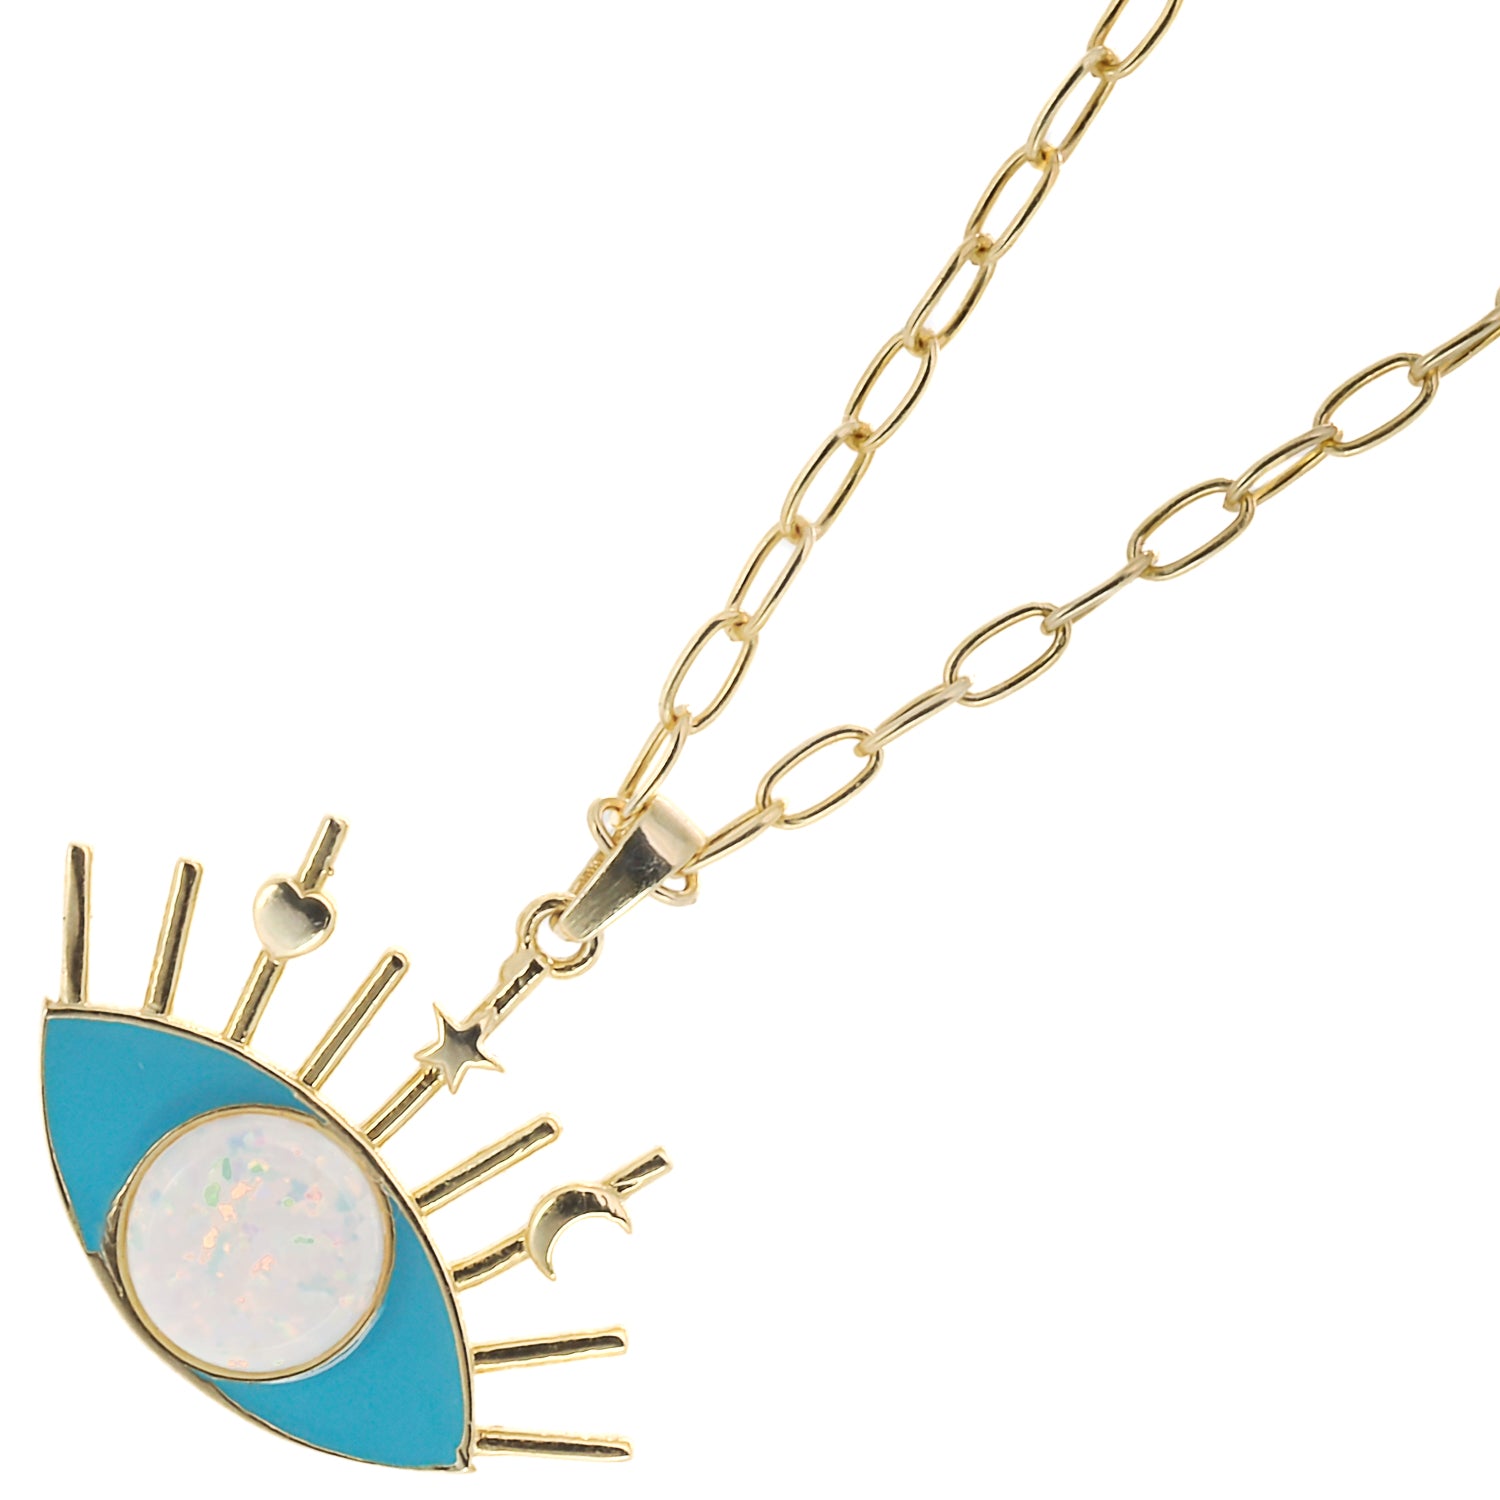 The adjustable sterling silver chain of the Opal Turquoise Evil Eye Necklace.